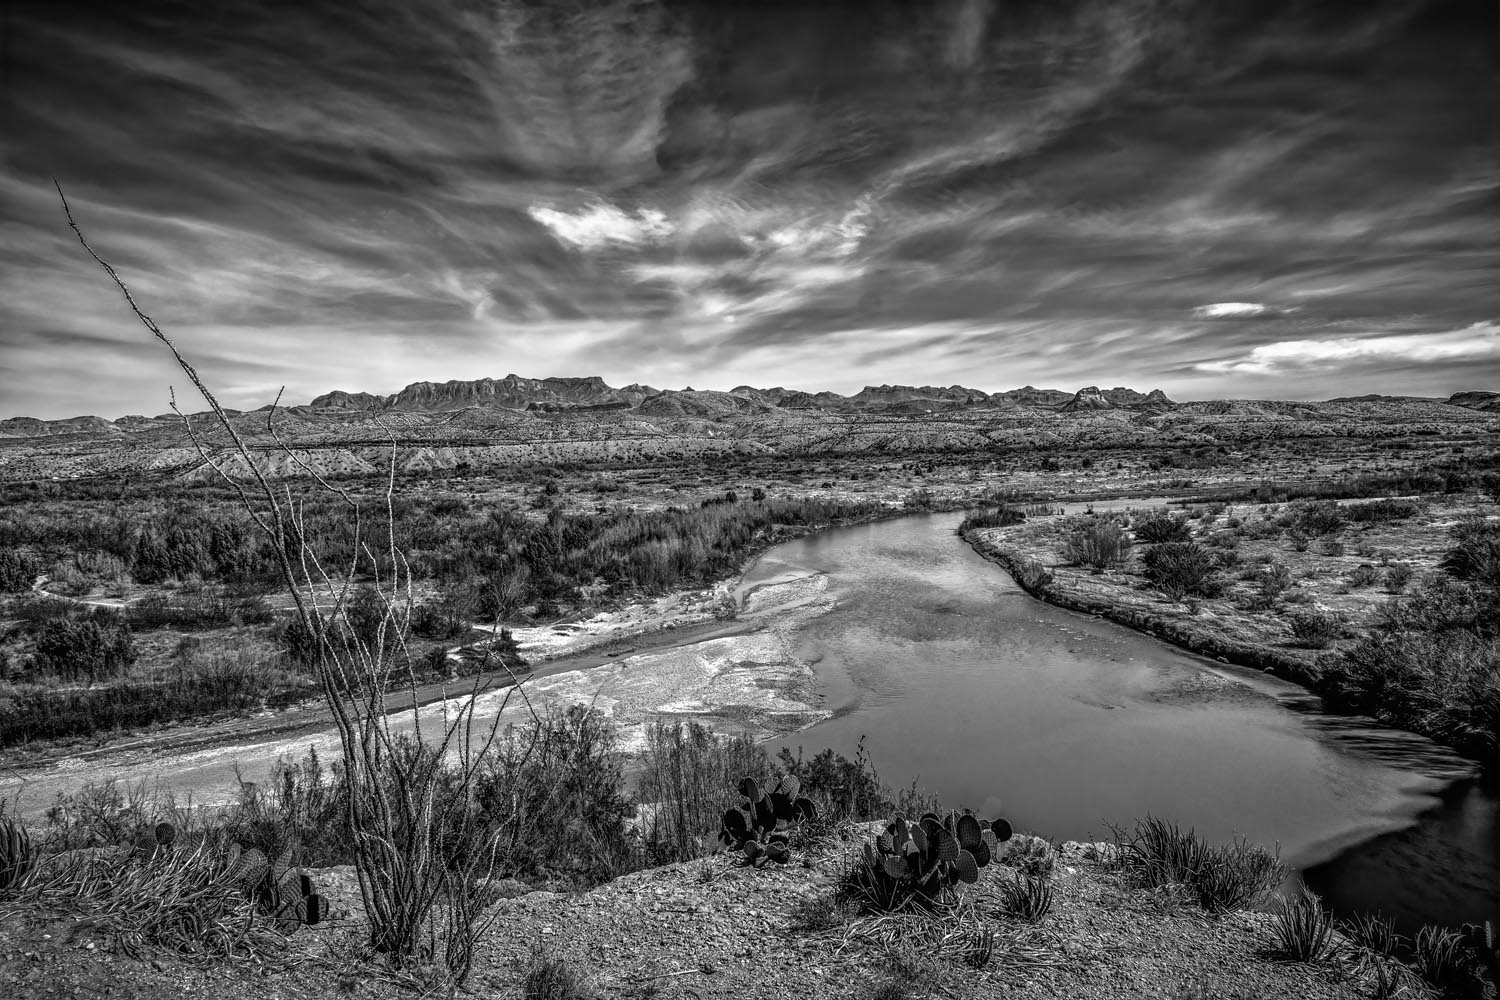 Ron Mouser: Majestic View - Big Bend National Park, Texas